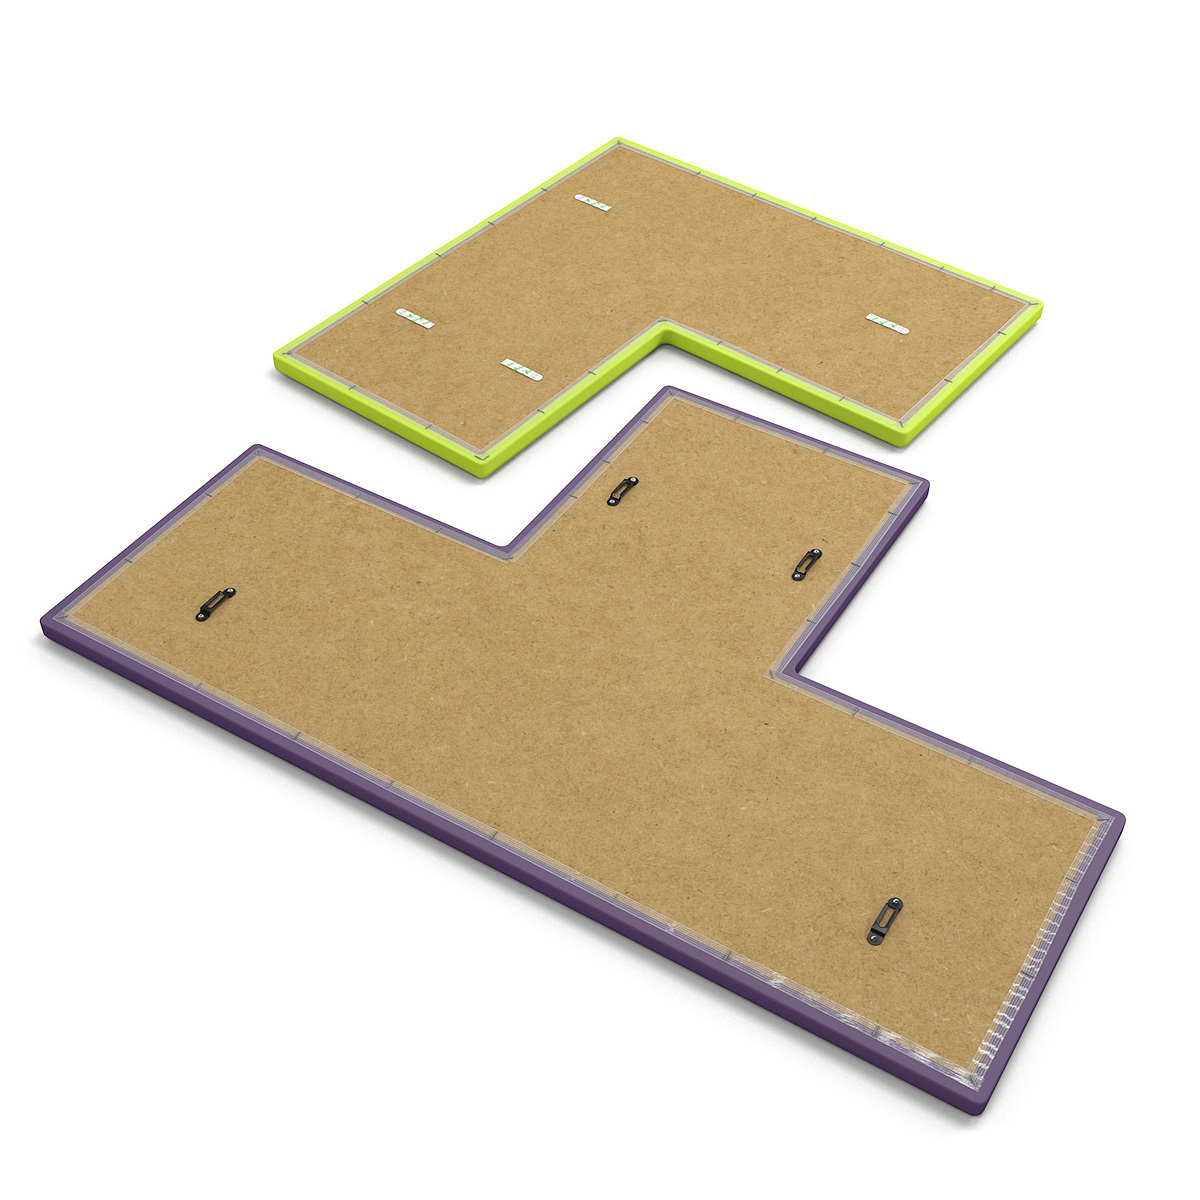 TETRATAK™ Acoustic Wall Tiles Include Two Mounting Options - Standard Keyhole Bracket (Require Screws) or 3M Command™️ Strips (Sticky Adhesive Back)